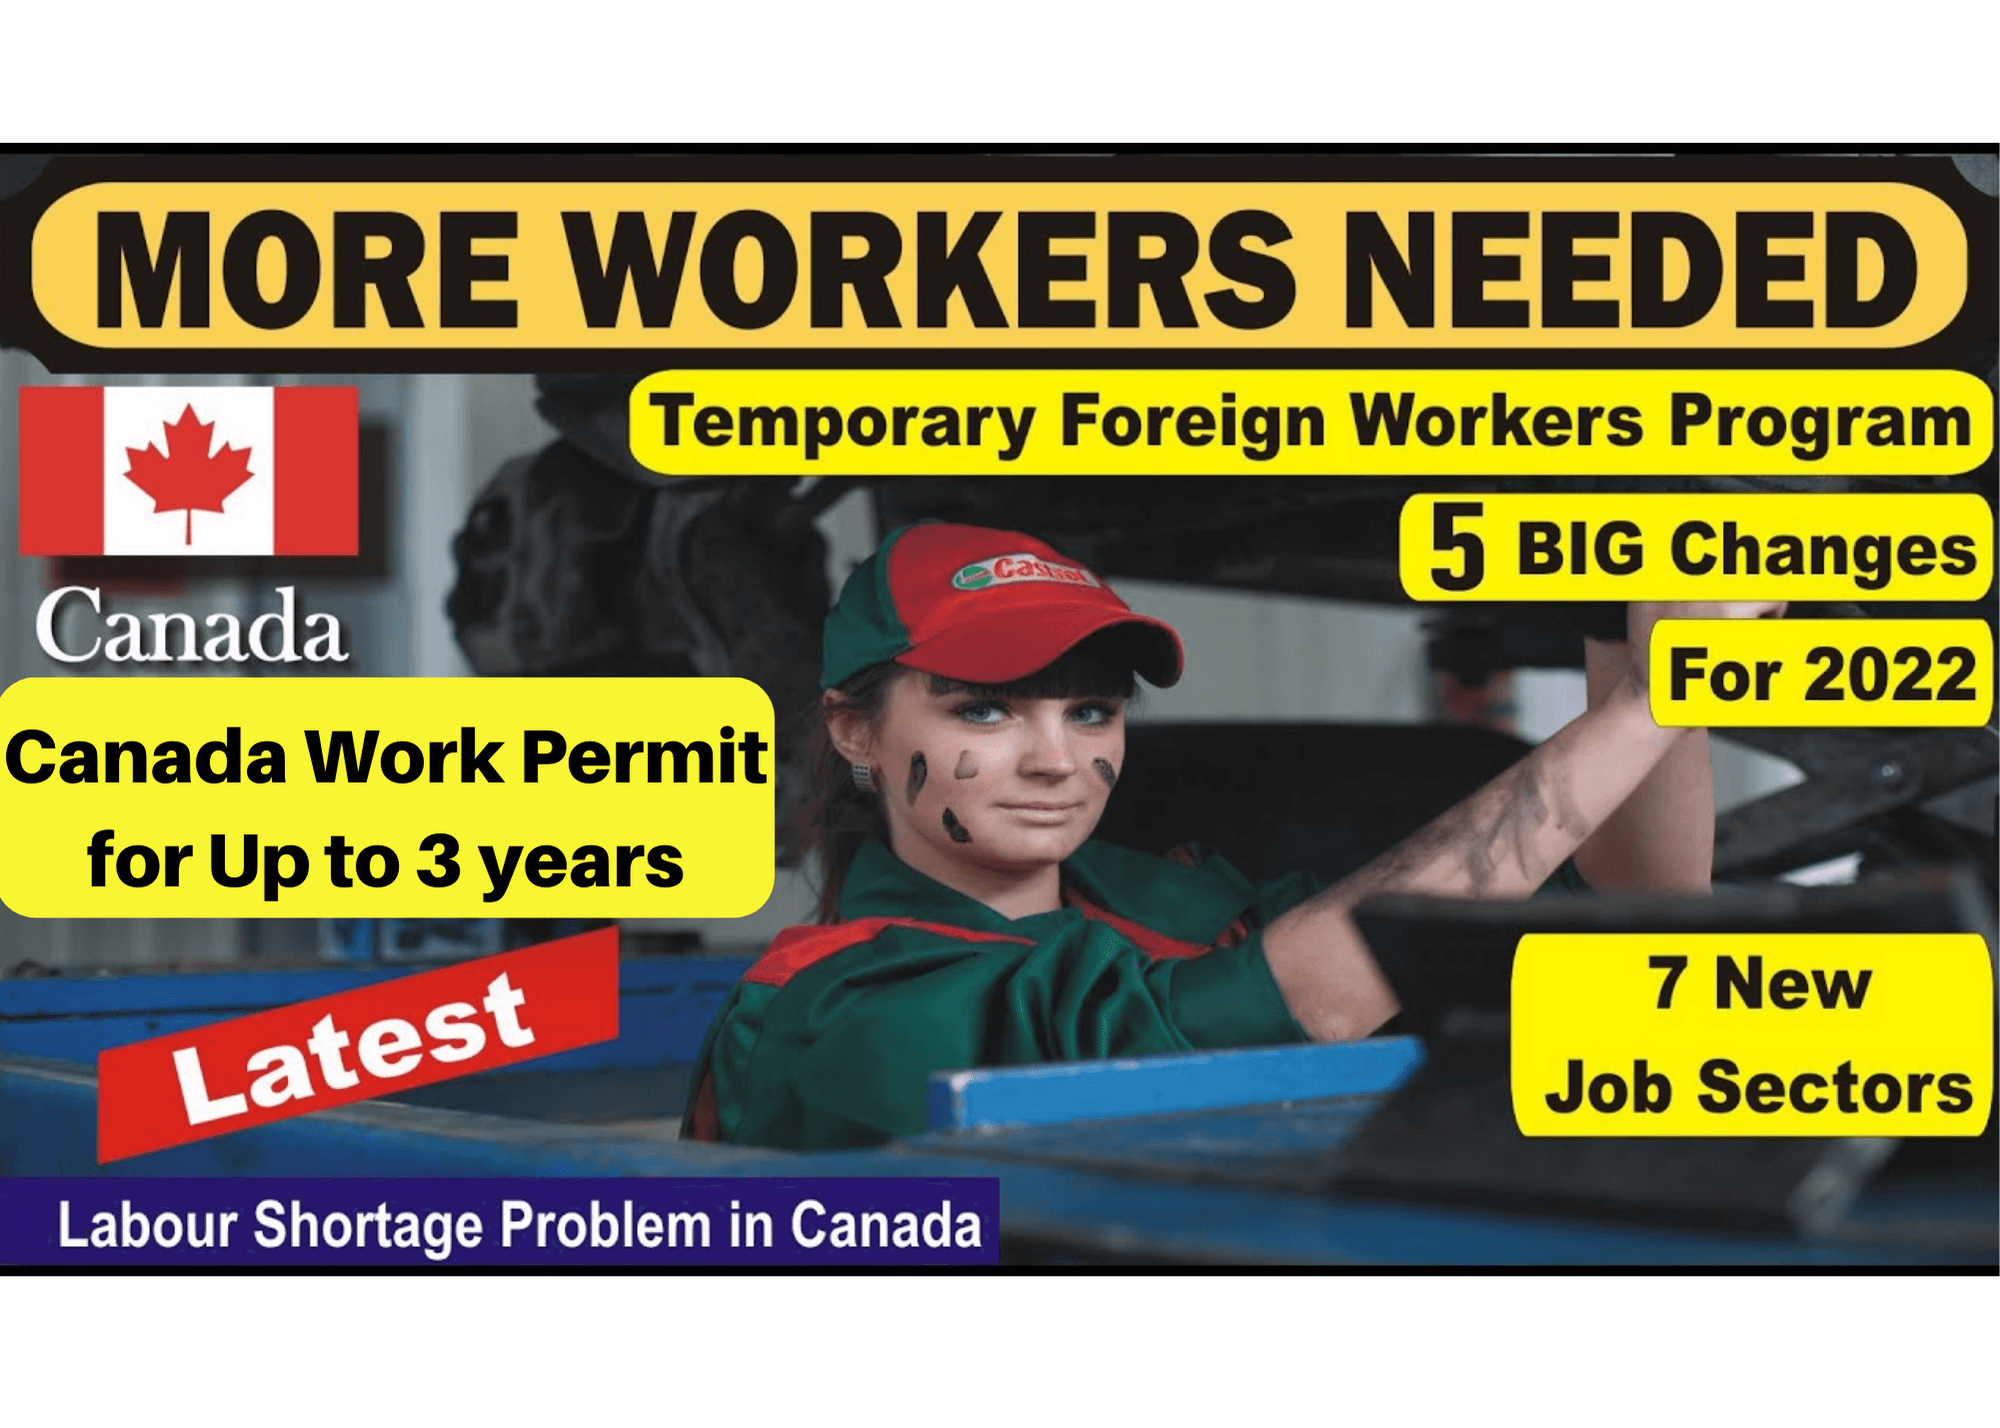 Canada Temporary Foreign Worker Program Changes